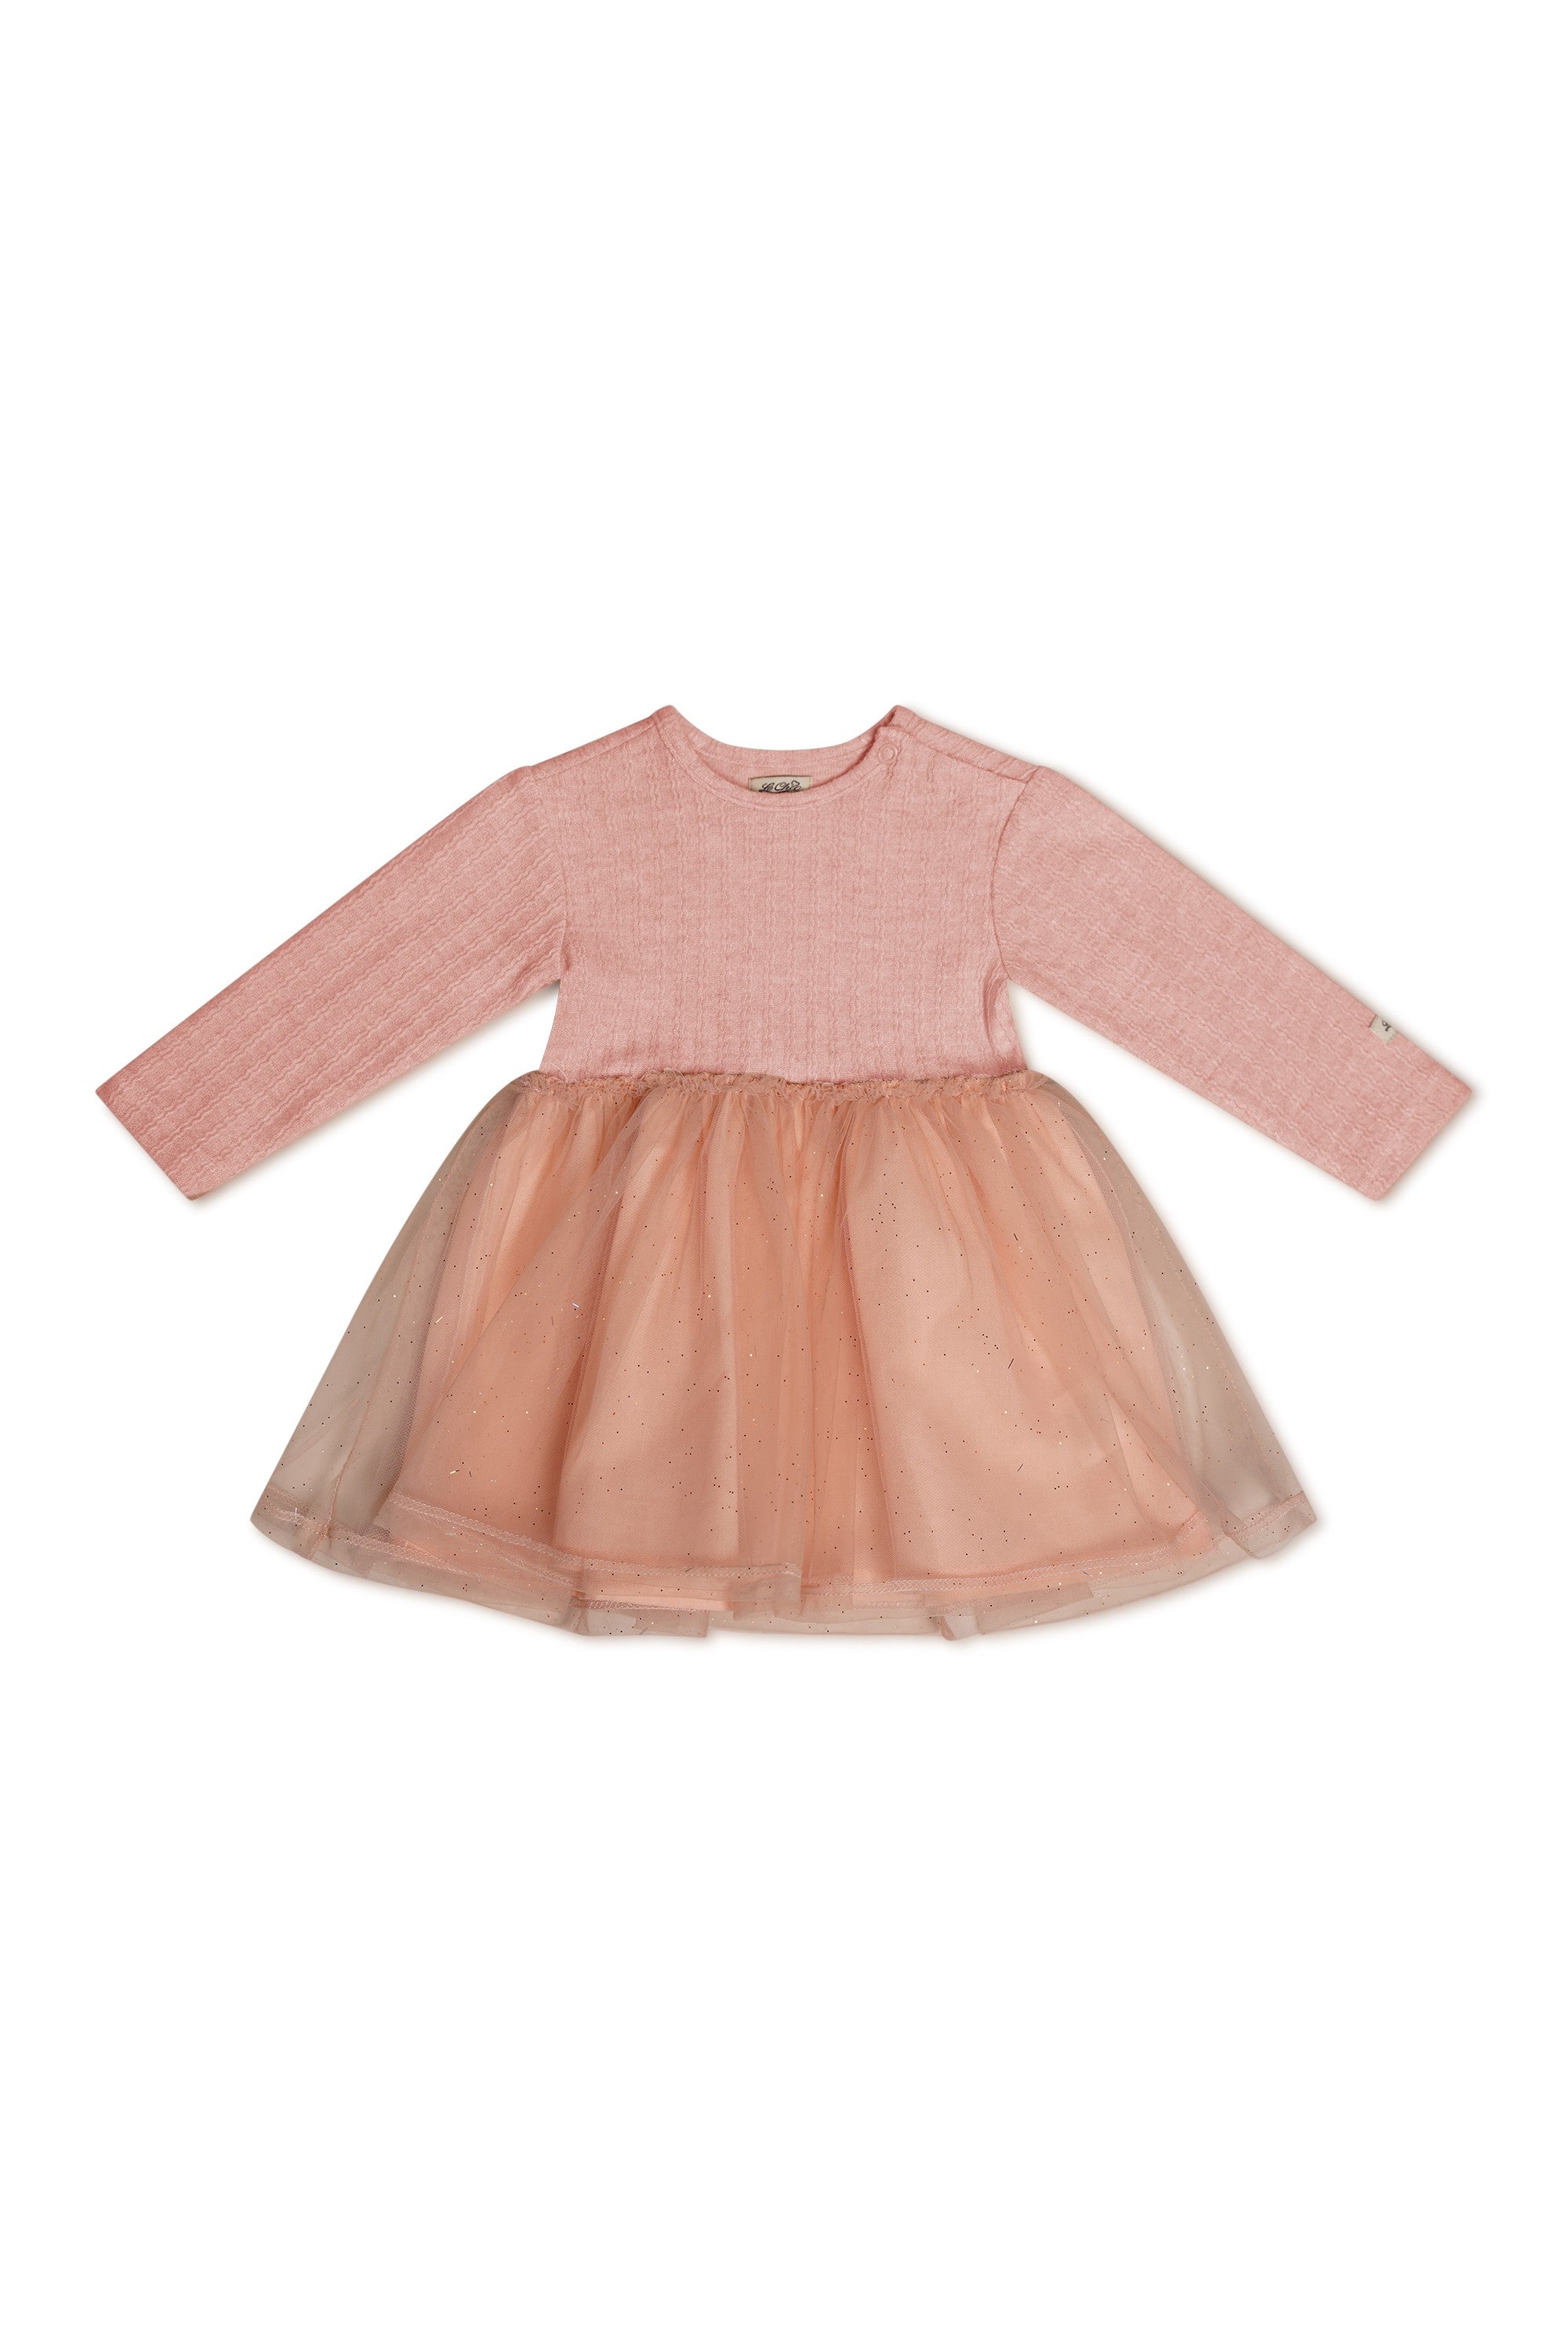 Solly Rib & Tulle Baby Dress - Cotton Candy - Twinkle Twinkle Little One